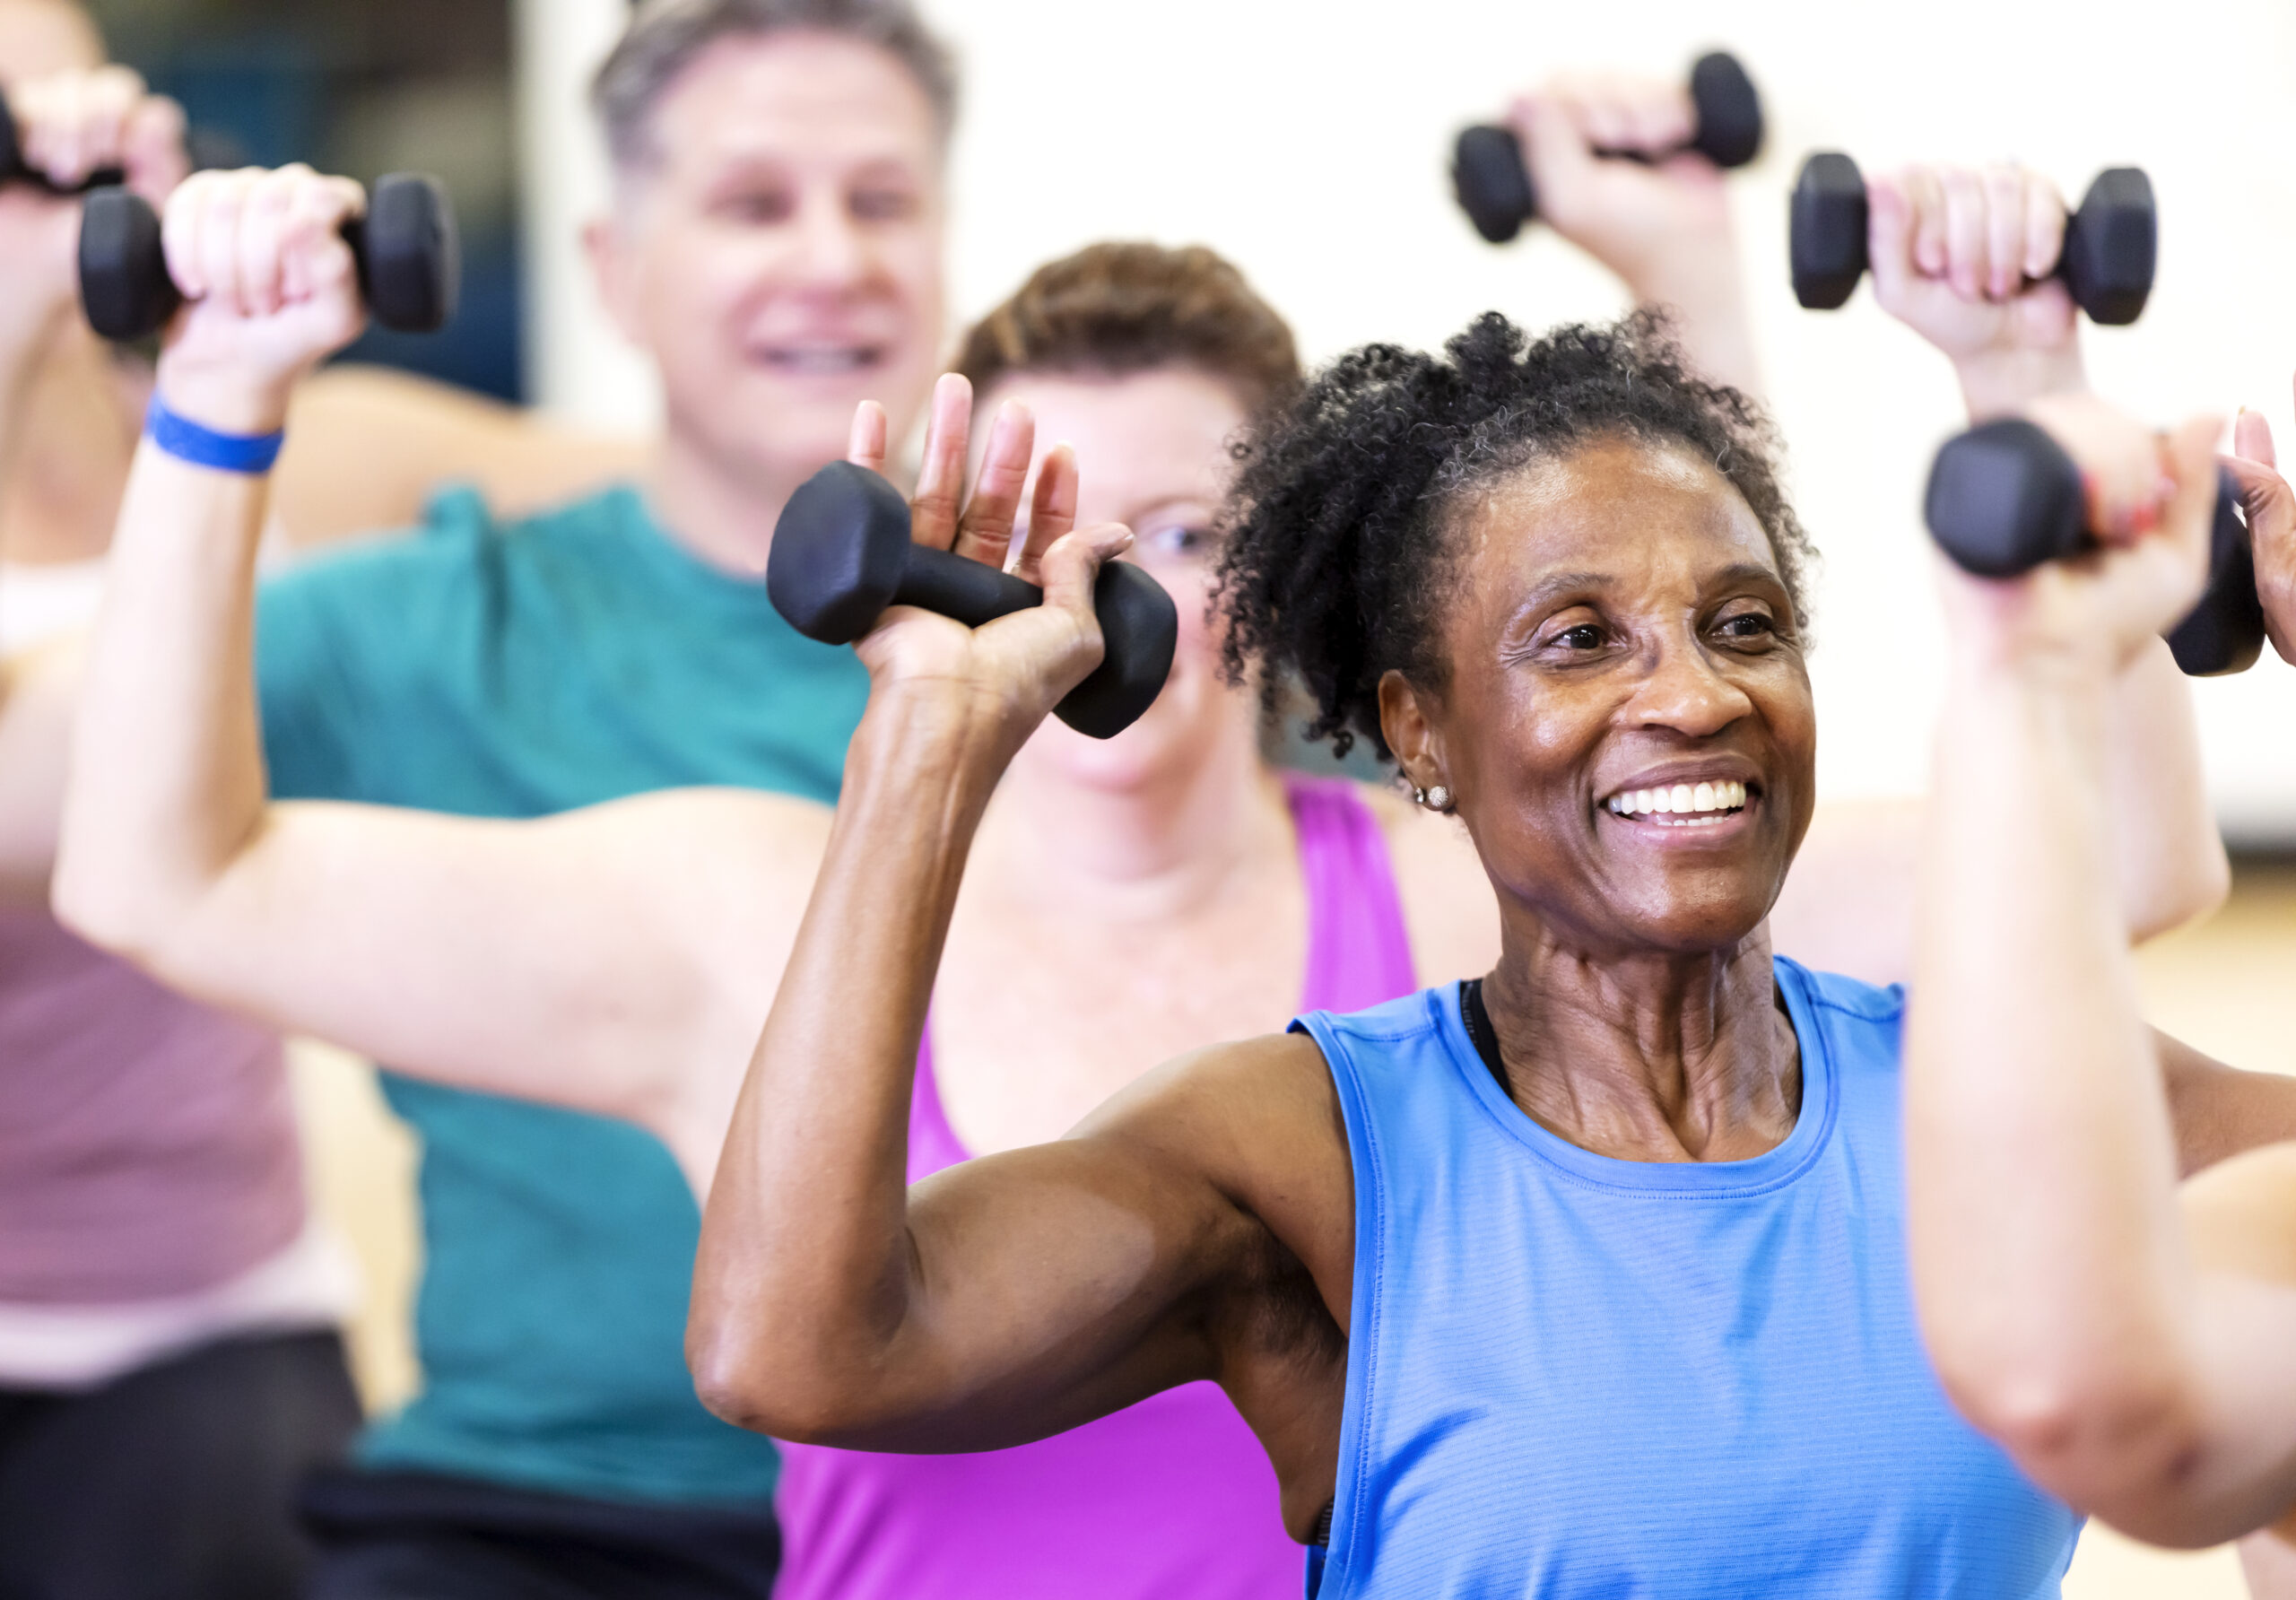 Close-up of a senior African-American woman in her 60s enjoying an exercise class. She is with a multiracial group of mature adults sitting on fitness balls and lifting hand weights.